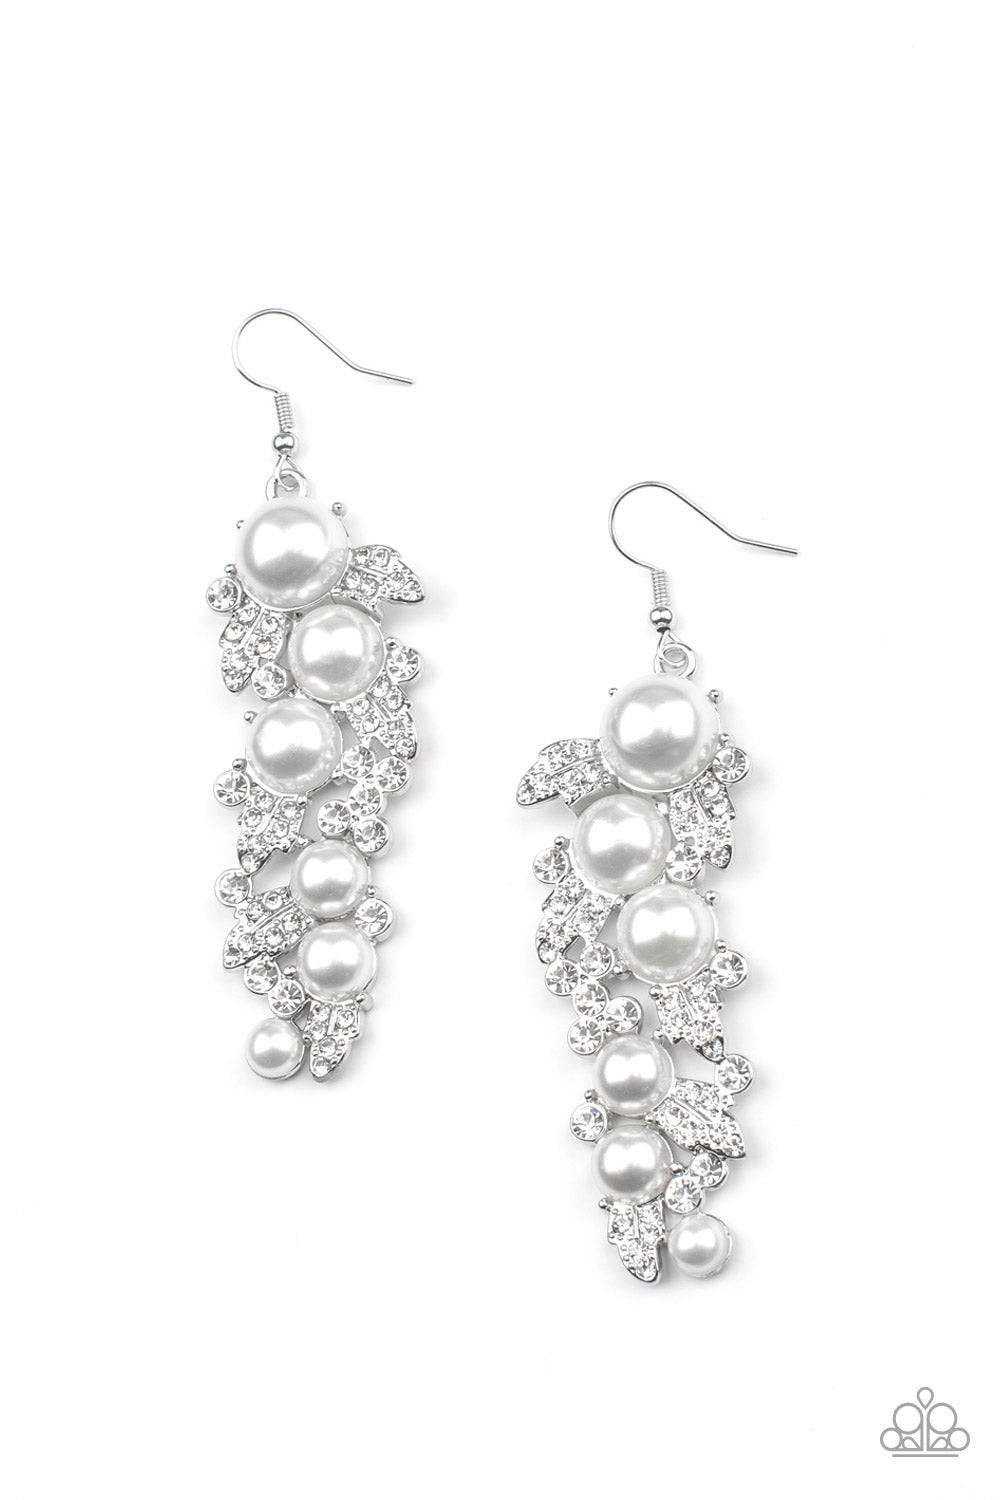 The Party Has Arrived - white - Paparazzi earrings